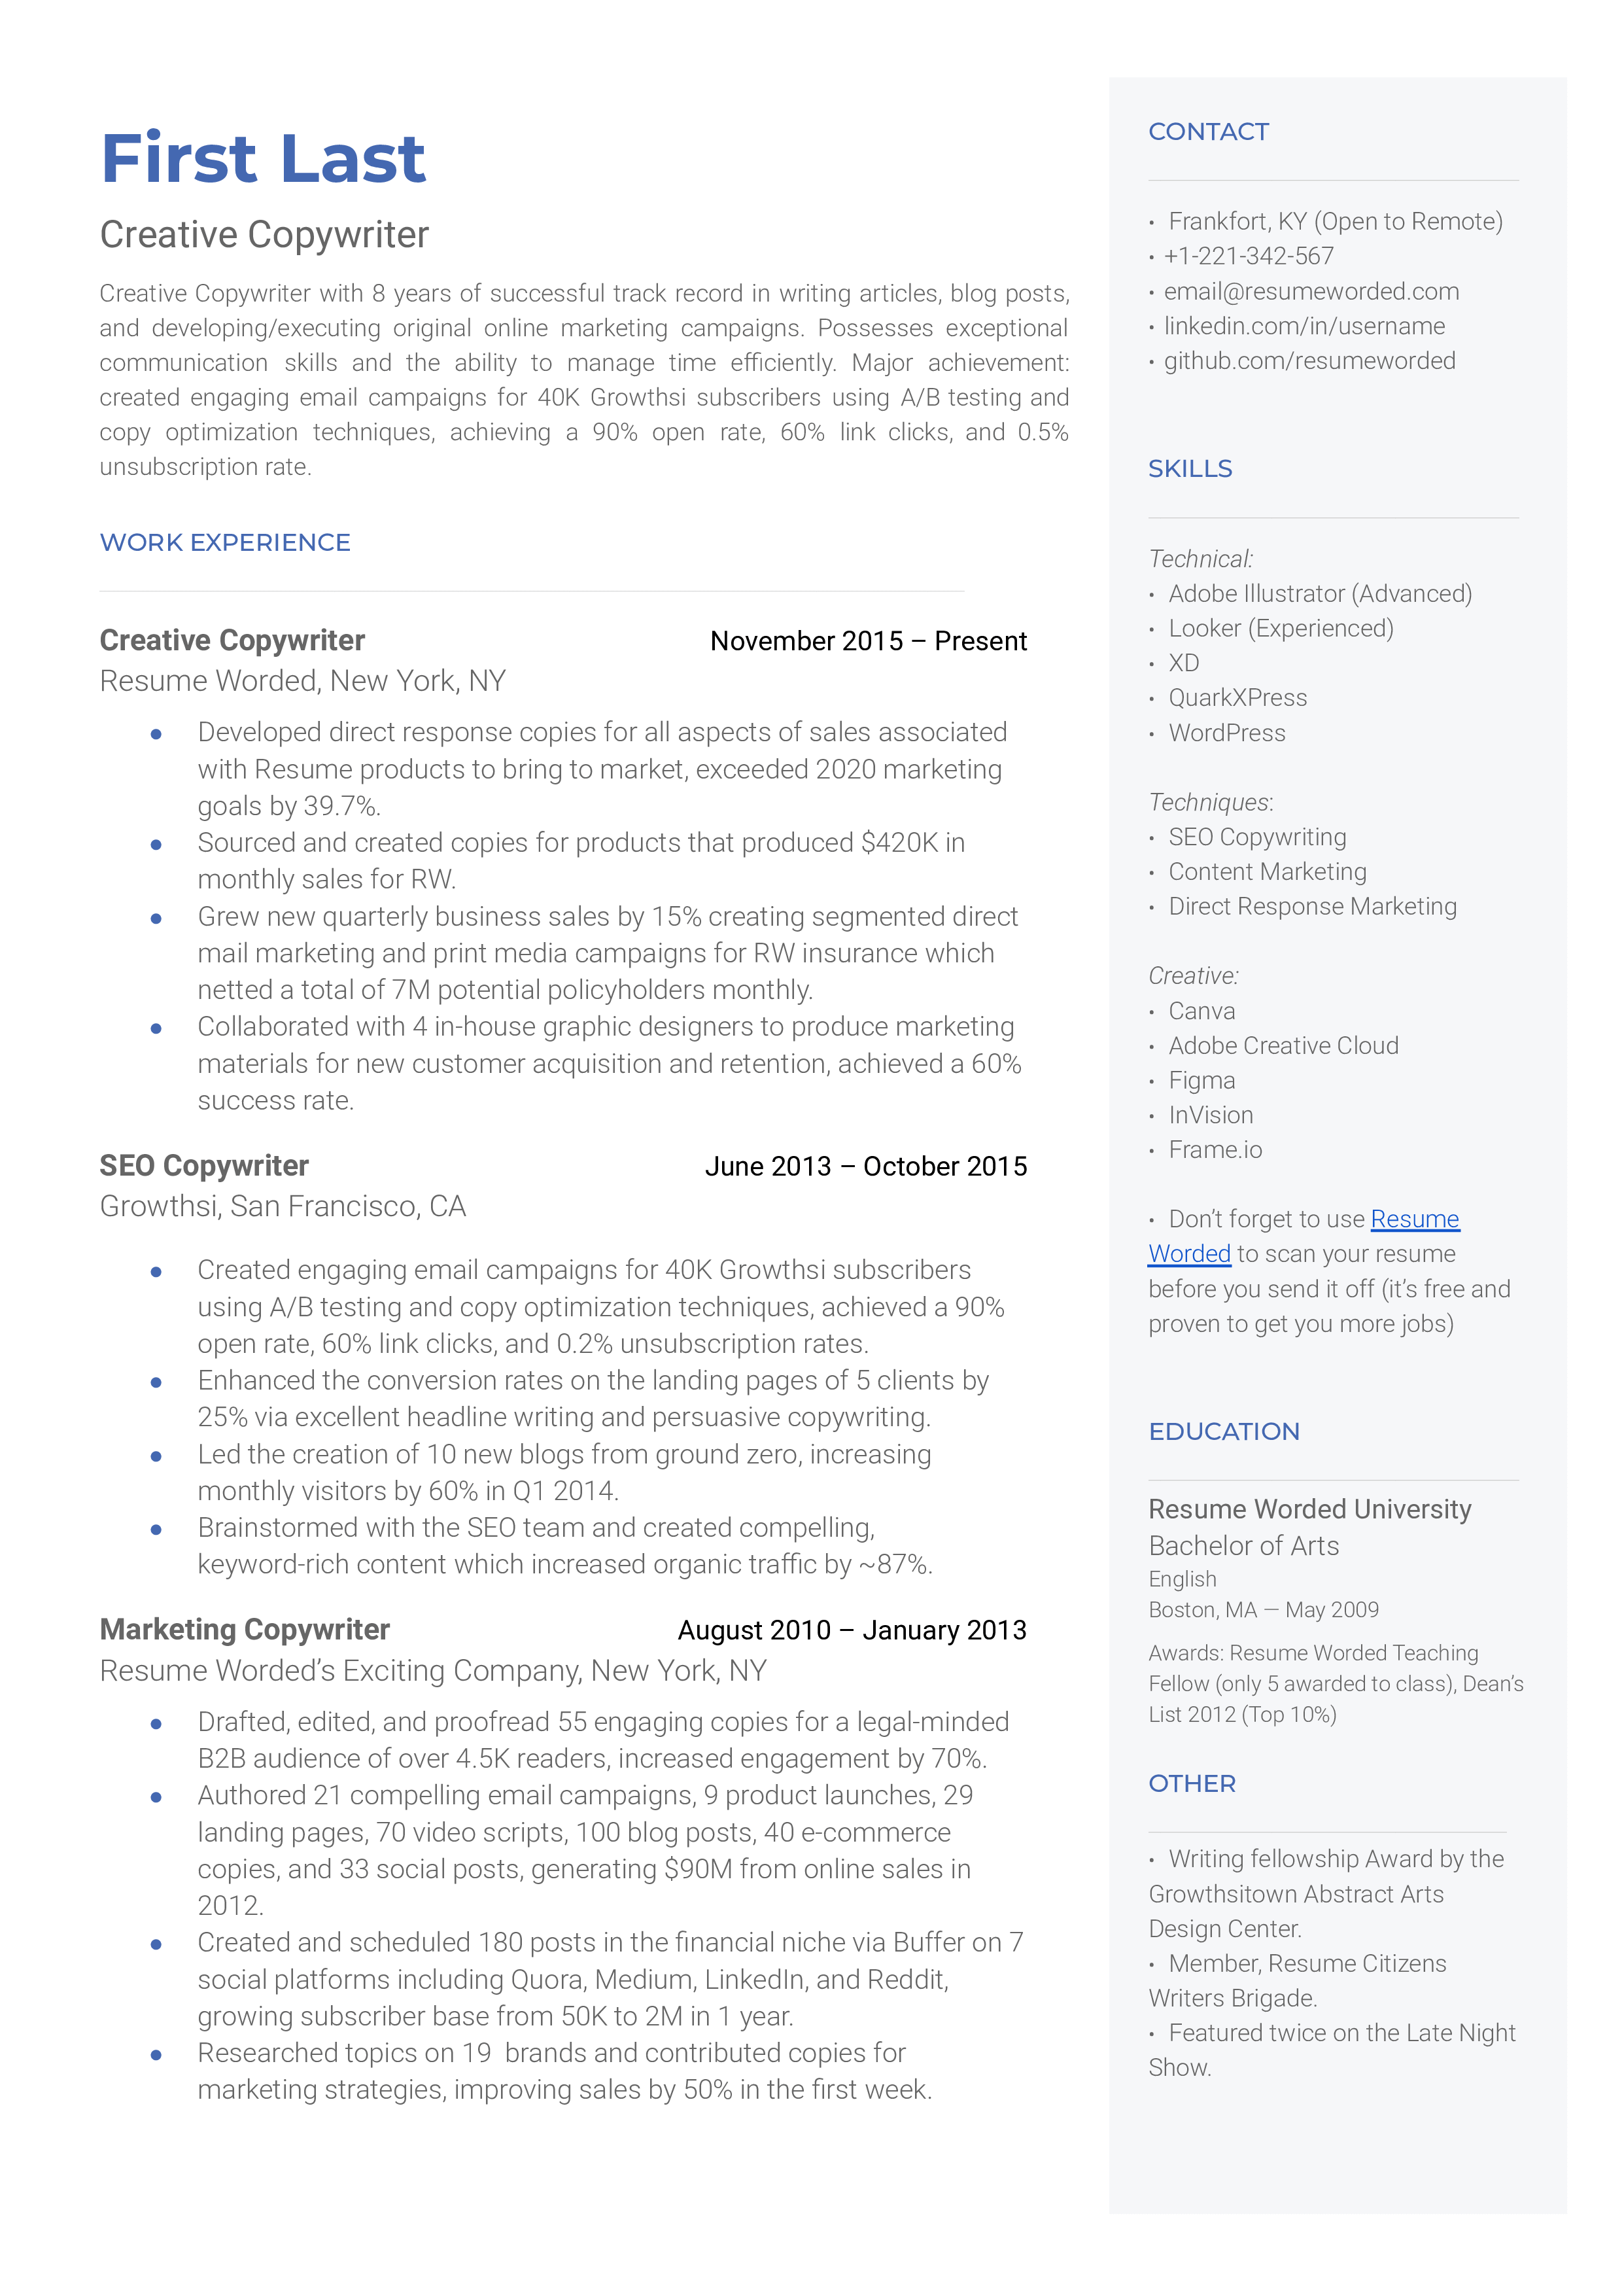 A creative copywriter resume sample that highlights a strong techical skill section and creative experience across various mediums